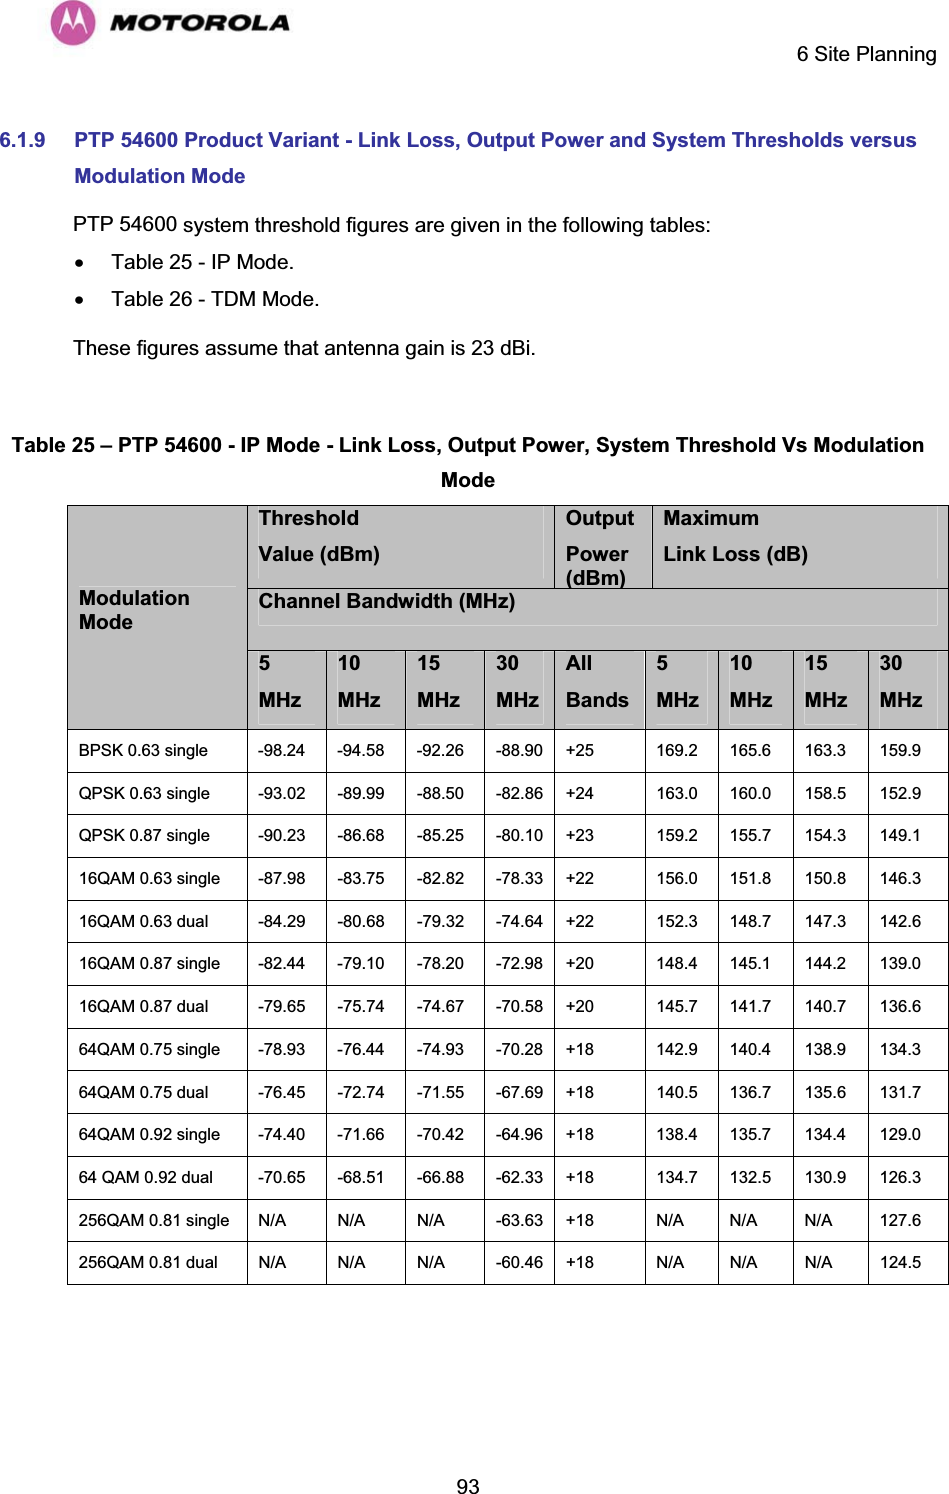     6 Site Planning  936.1.9 PTP 54600 Product Variant - Link Loss, Output Power and System Thresholds versus Modulation Mode PTP 54600 system threshold figures are given in the following tables: x  Table 25 - IP Mode. x  Table 26 - TDM Mode. These figures assume that antenna gain is 23 dBi.  Table 25 – PTP 54600 - IP Mode - Link Loss, Output Power, System Threshold Vs Modulation ModeThreshold Value (dBm) Output Power (dBm)MaximumLink Loss (dB) Channel Bandwidth (MHz) ModulationMode5MHz10MHz15MHz30MHzAllBands 5MHz10MHz15MHz30MHzBPSK 0.63 single  -98.24   -94.58   -92.26   -88.90  +25  169.2   165.6   163.3   159.9  QPSK 0.63 single  -93.02   -89.99   -88.50   -82.86  +24  163.0   160.0   158.5   152.9  QPSK 0.87 single  -90.23   -86.68   -85.25   -80.10  +23  159.2   155.7   154.3   149.1  16QAM 0.63 single  -87.98   -83.75   -82.82   -78.33  +22  156.0   151.8   150.8   146.3  16QAM 0.63 dual  -84.29   -80.68   -79.32   -74.64  +22  152.3   148.7   147.3   142.6  16QAM 0.87 single  -82.44   -79.10   -78.20   -72.98  +20  148.4   145.1   144.2   139.0  16QAM 0.87 dual  -79.65   -75.74   -74.67   -70.58  +20  145.7   141.7   140.7   136.6  64QAM 0.75 single  -78.93   -76.44   -74.93   -70.28  +18  142.9   140.4   138.9   134.3  64QAM 0.75 dual  -76.45   -72.74   -71.55   -67.69  +18  140.5   136.7   135.6   131.7  64QAM 0.92 single  -74.40   -71.66   -70.42   -64.96  +18  138.4   135.7   134.4   129.0  64 QAM 0.92 dual  -70.65   -68.51   -66.88   -62.33  +18  134.7   132.5   130.9   126.3  256QAM 0.81 single  N/A   N/A   N/A   -63.63  +18  N/A   N/A   N/A   127.6  256QAM 0.81 dual  N/A   N/A   N/A   -60.46  +18  N/A   N/A   N/A   124.5   